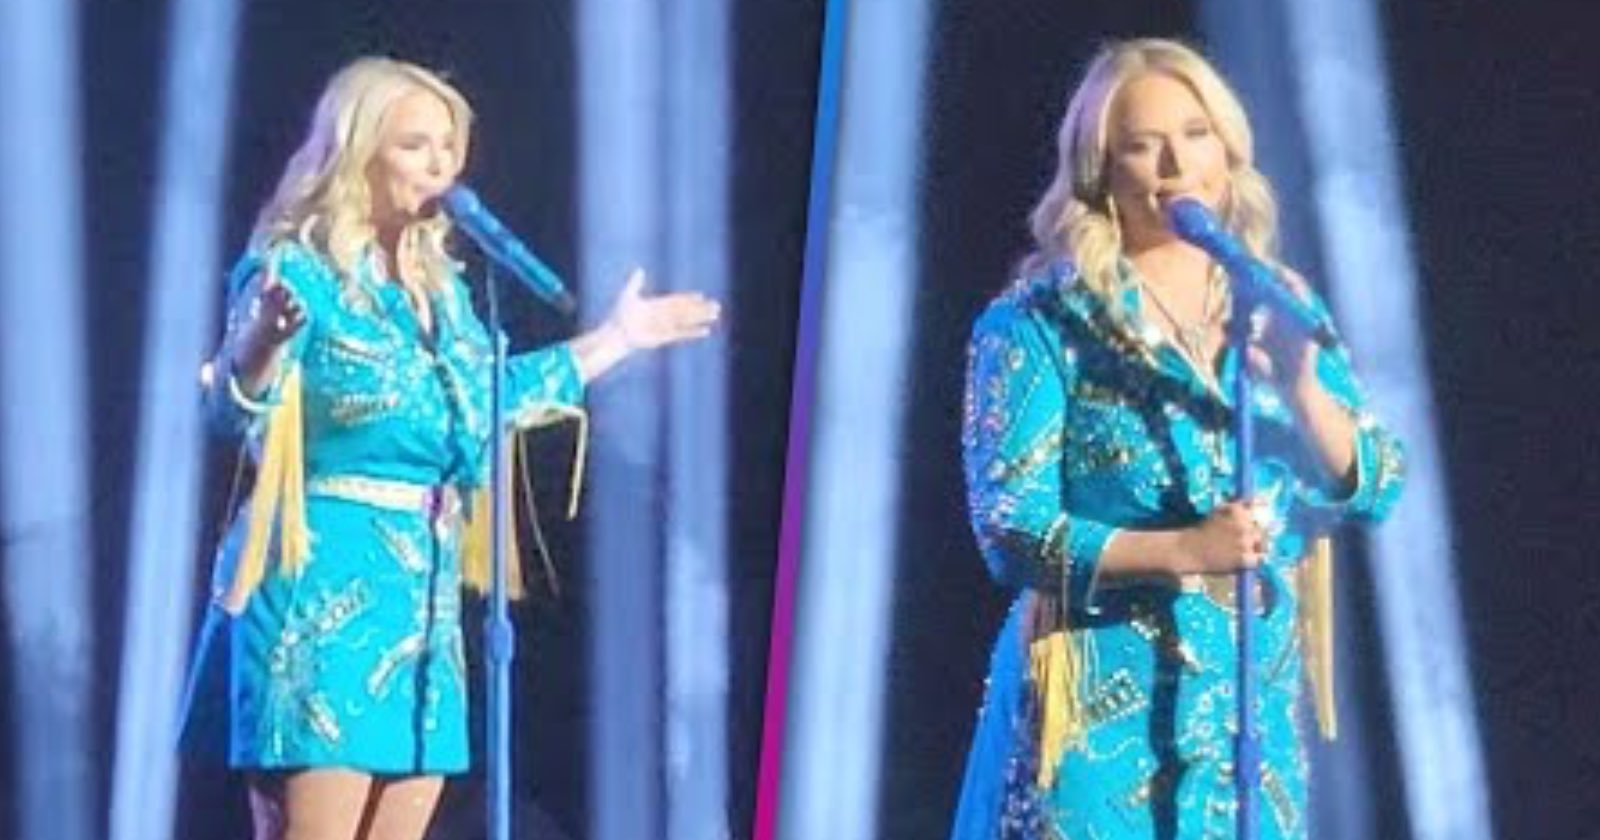 Miranda Lambert Sparks Debate After Stopping Concert to Call Out Selfie